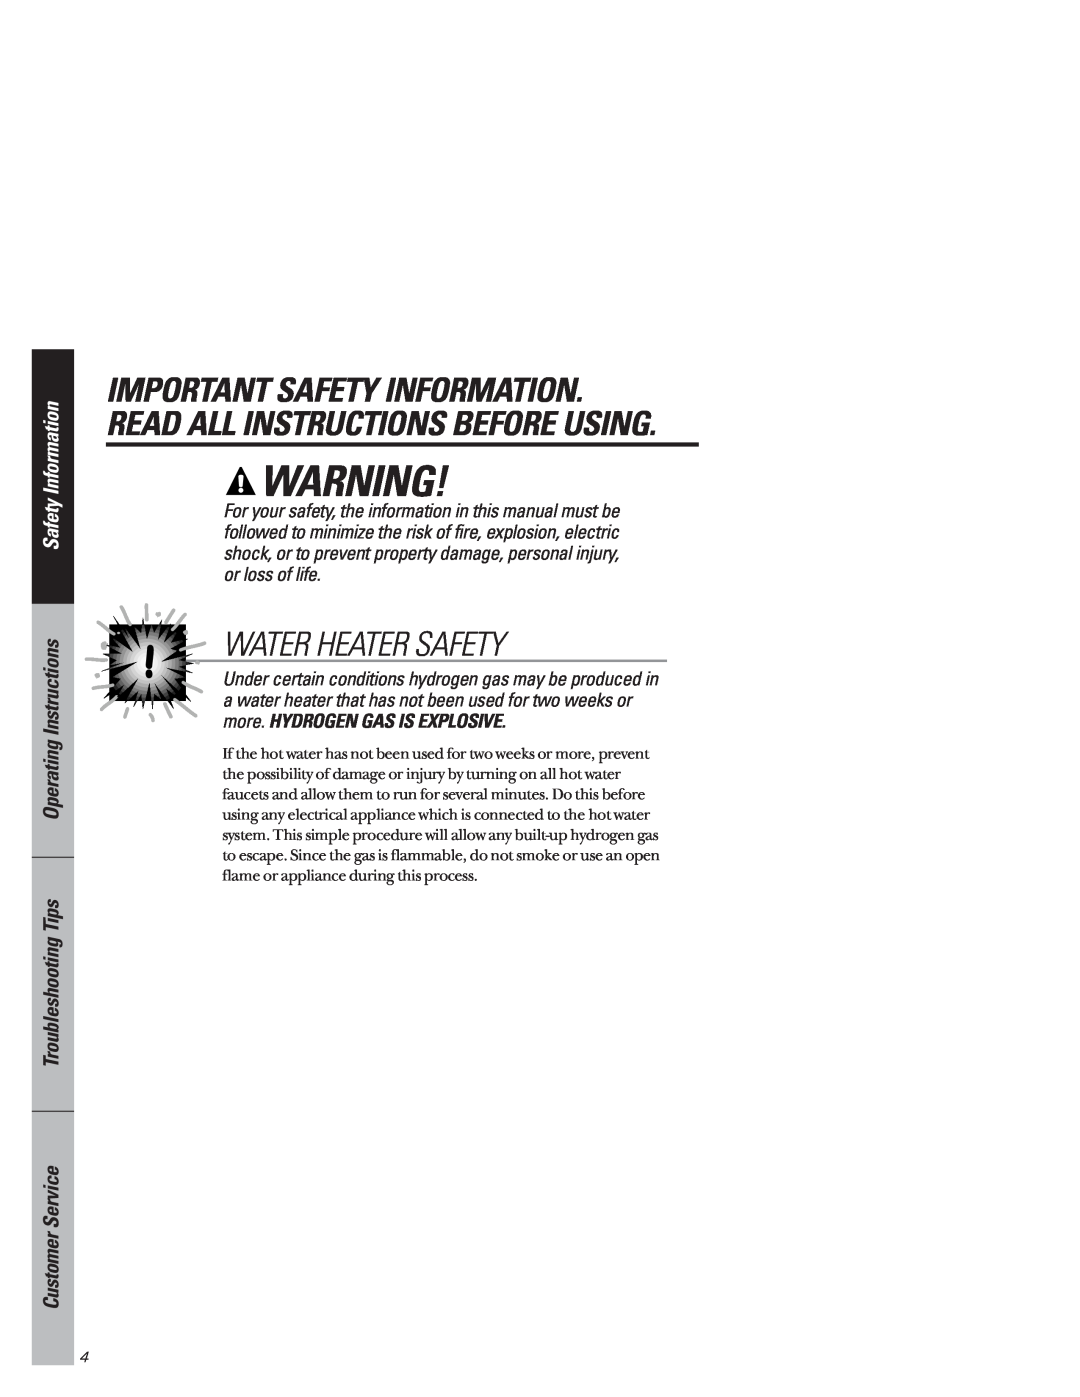 GE GSD4325, GSD4320, GSD4335, GSD4310 Water Heater Safety, Important Safety Information. Read All Instructions Before Using 